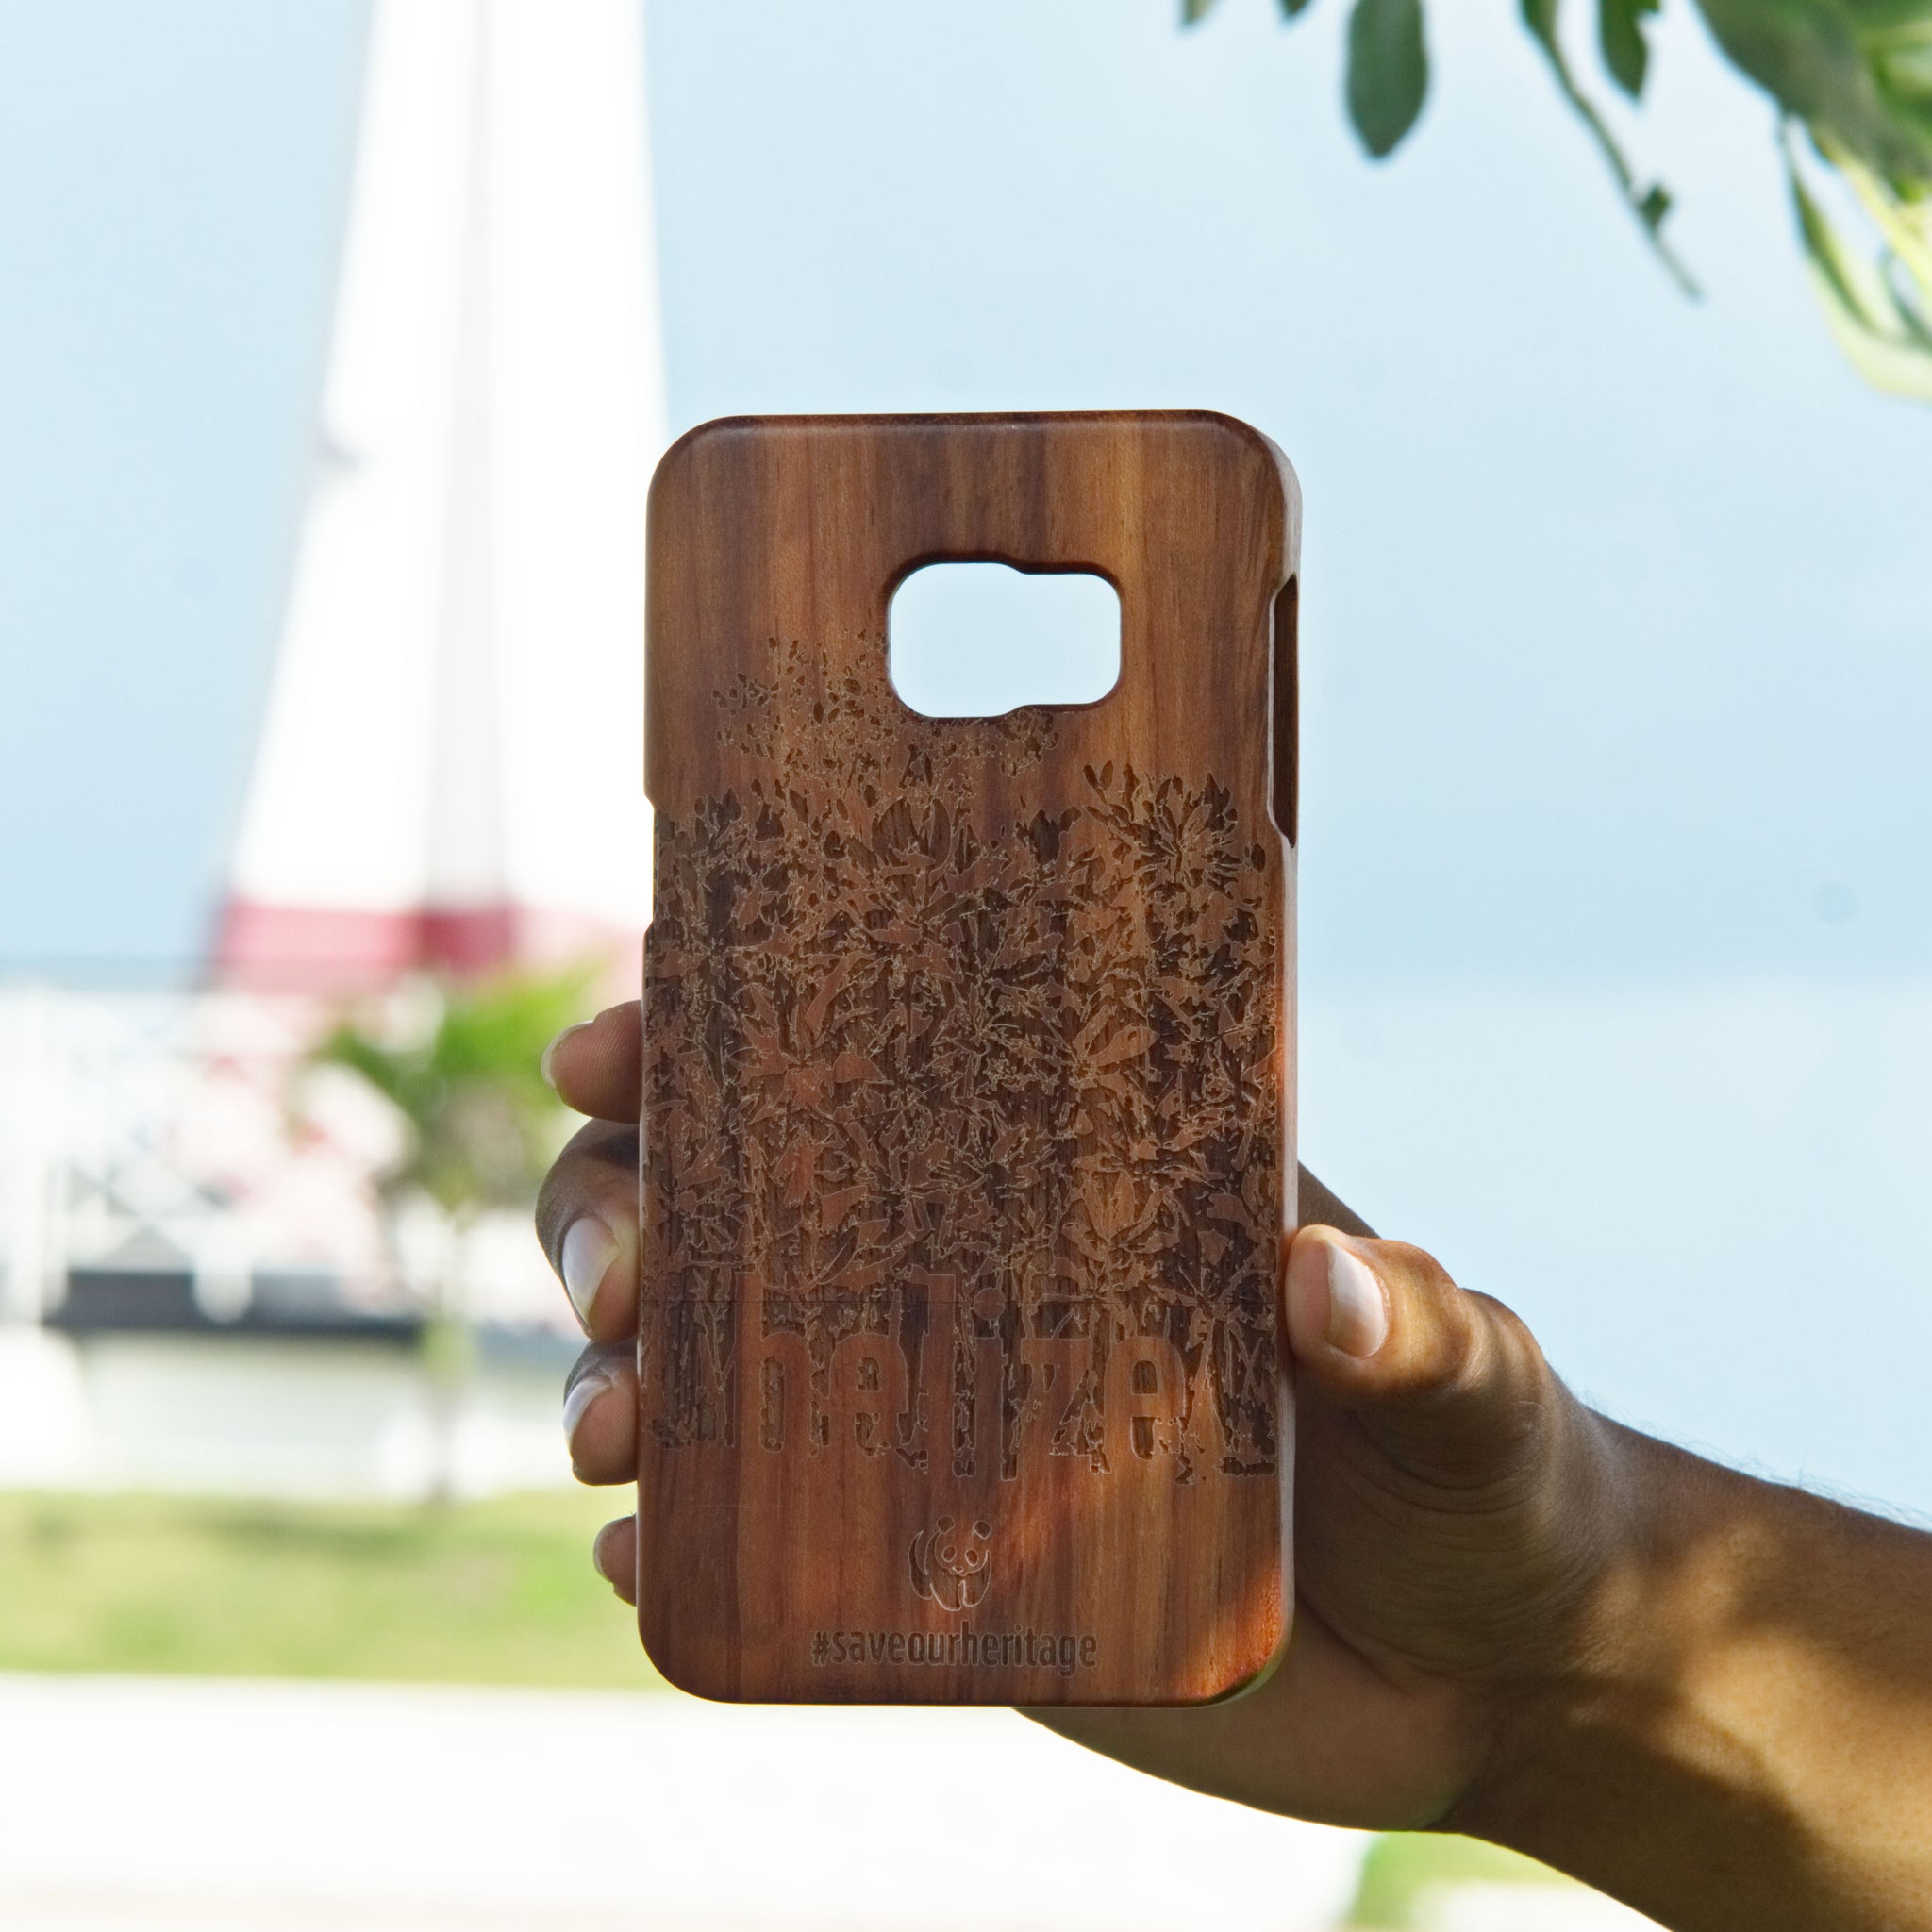 Samsung Galaxy S6 edge+ (WWF Belize Saving our Shared Heritage design)